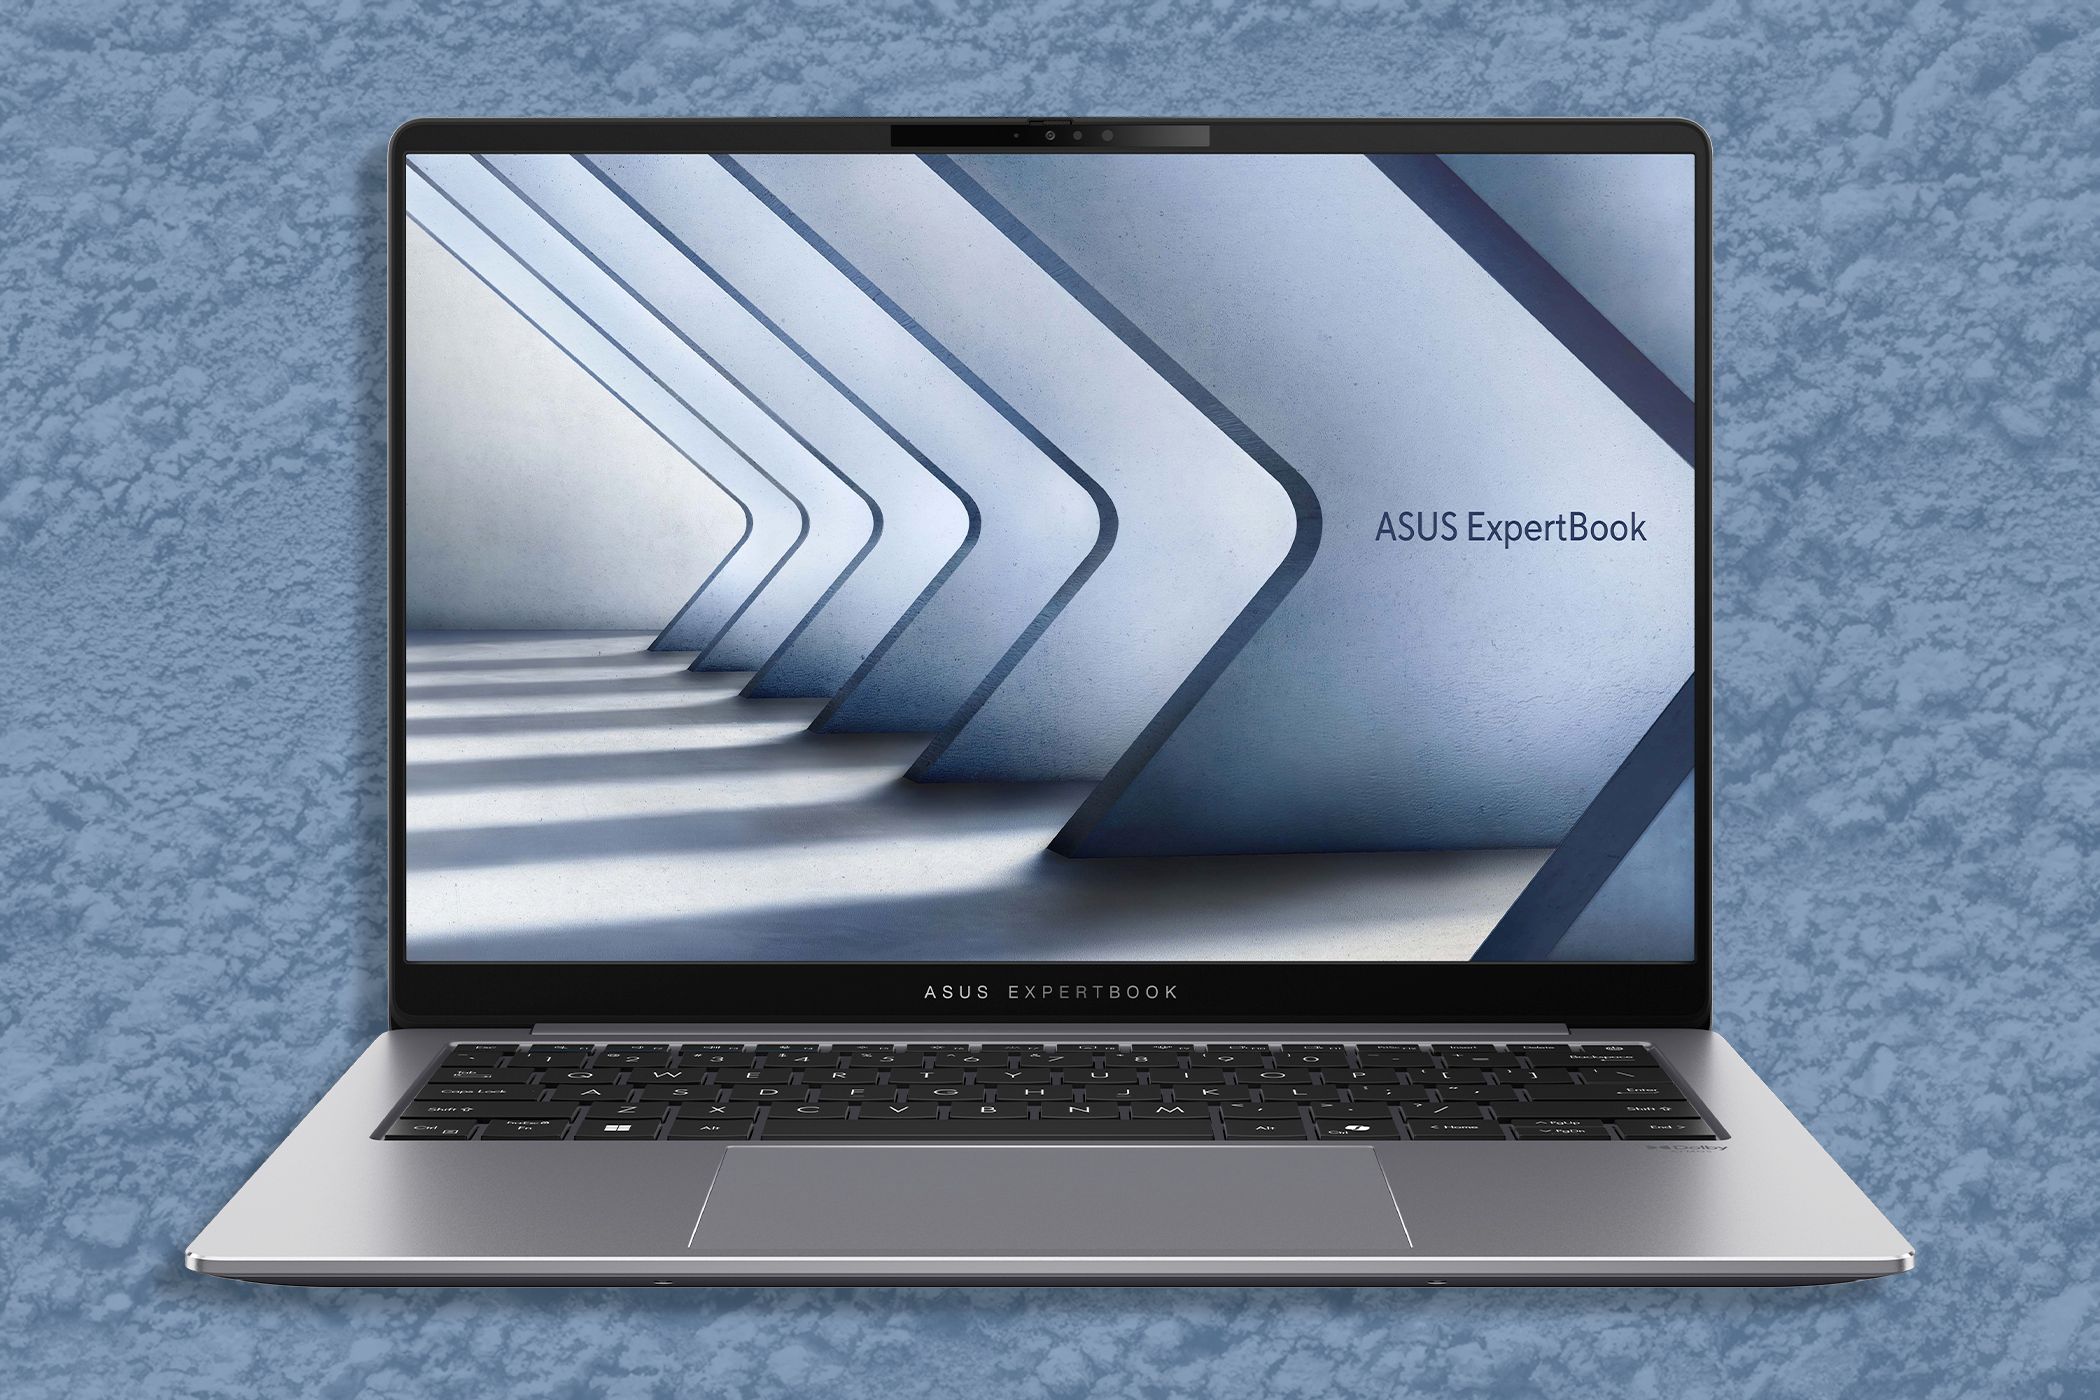 The ASUS ExpertBook P5 laptop on a blue background.